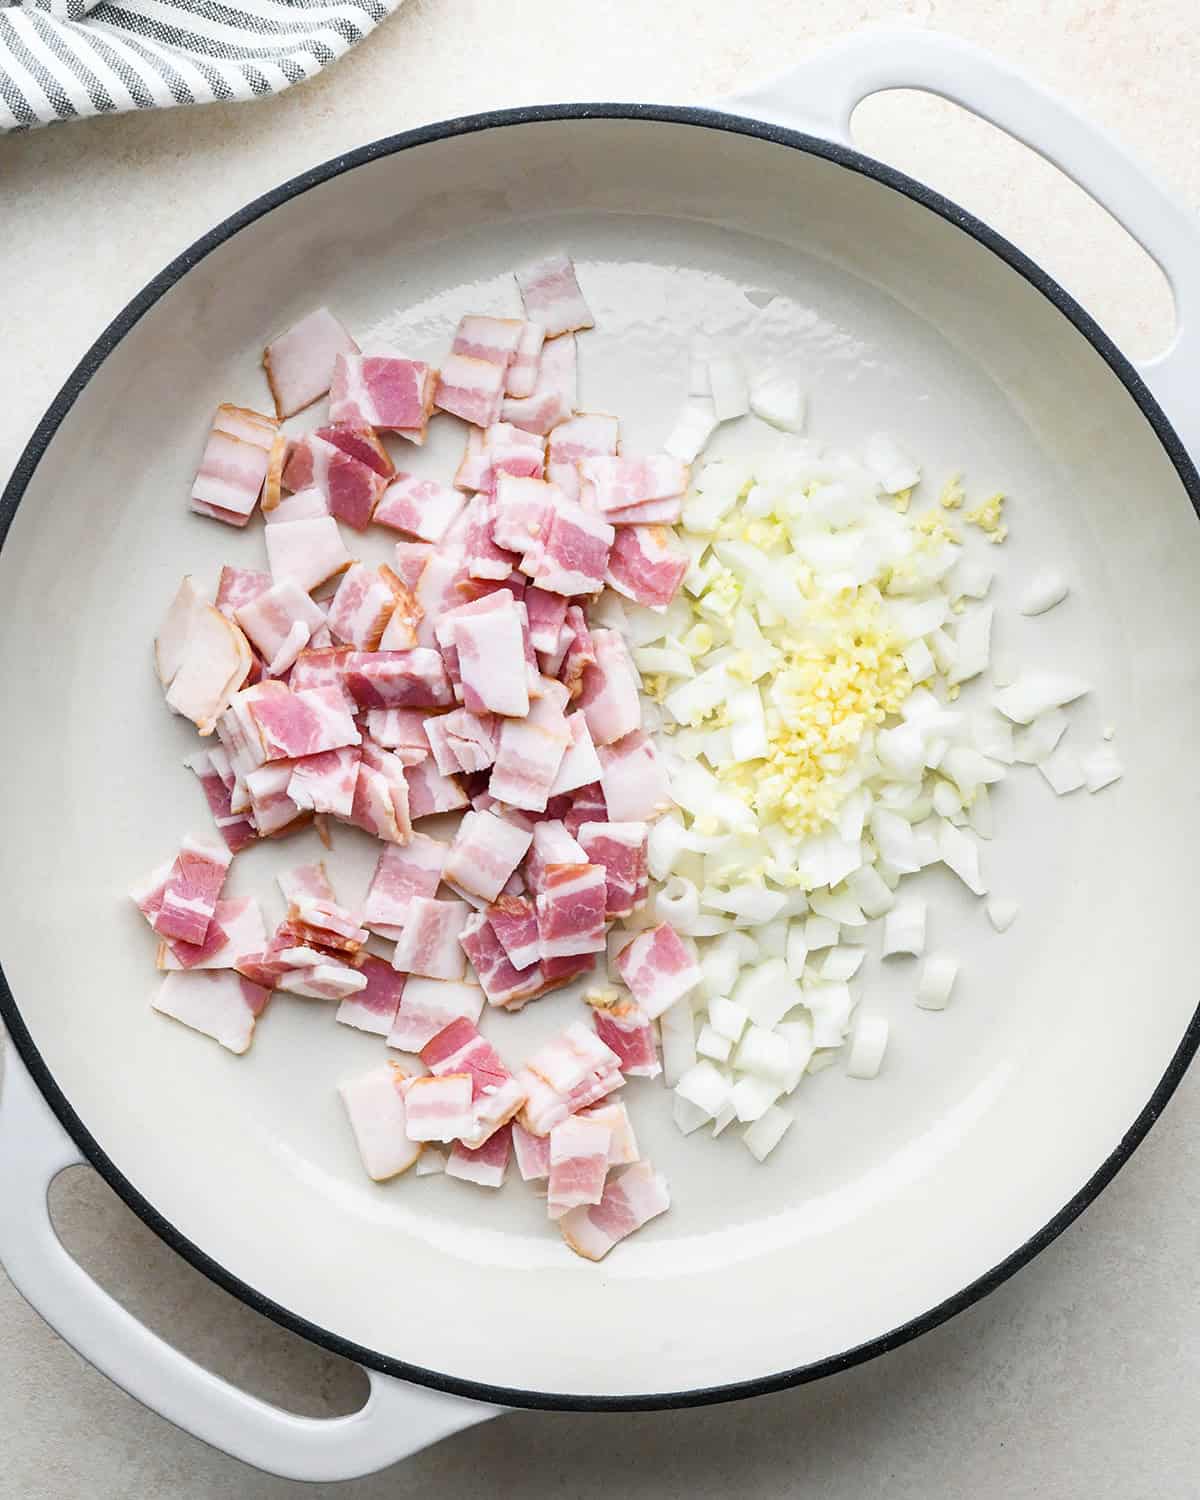 bacon, onion and garlic in a pan before cooking to make bacon quiche